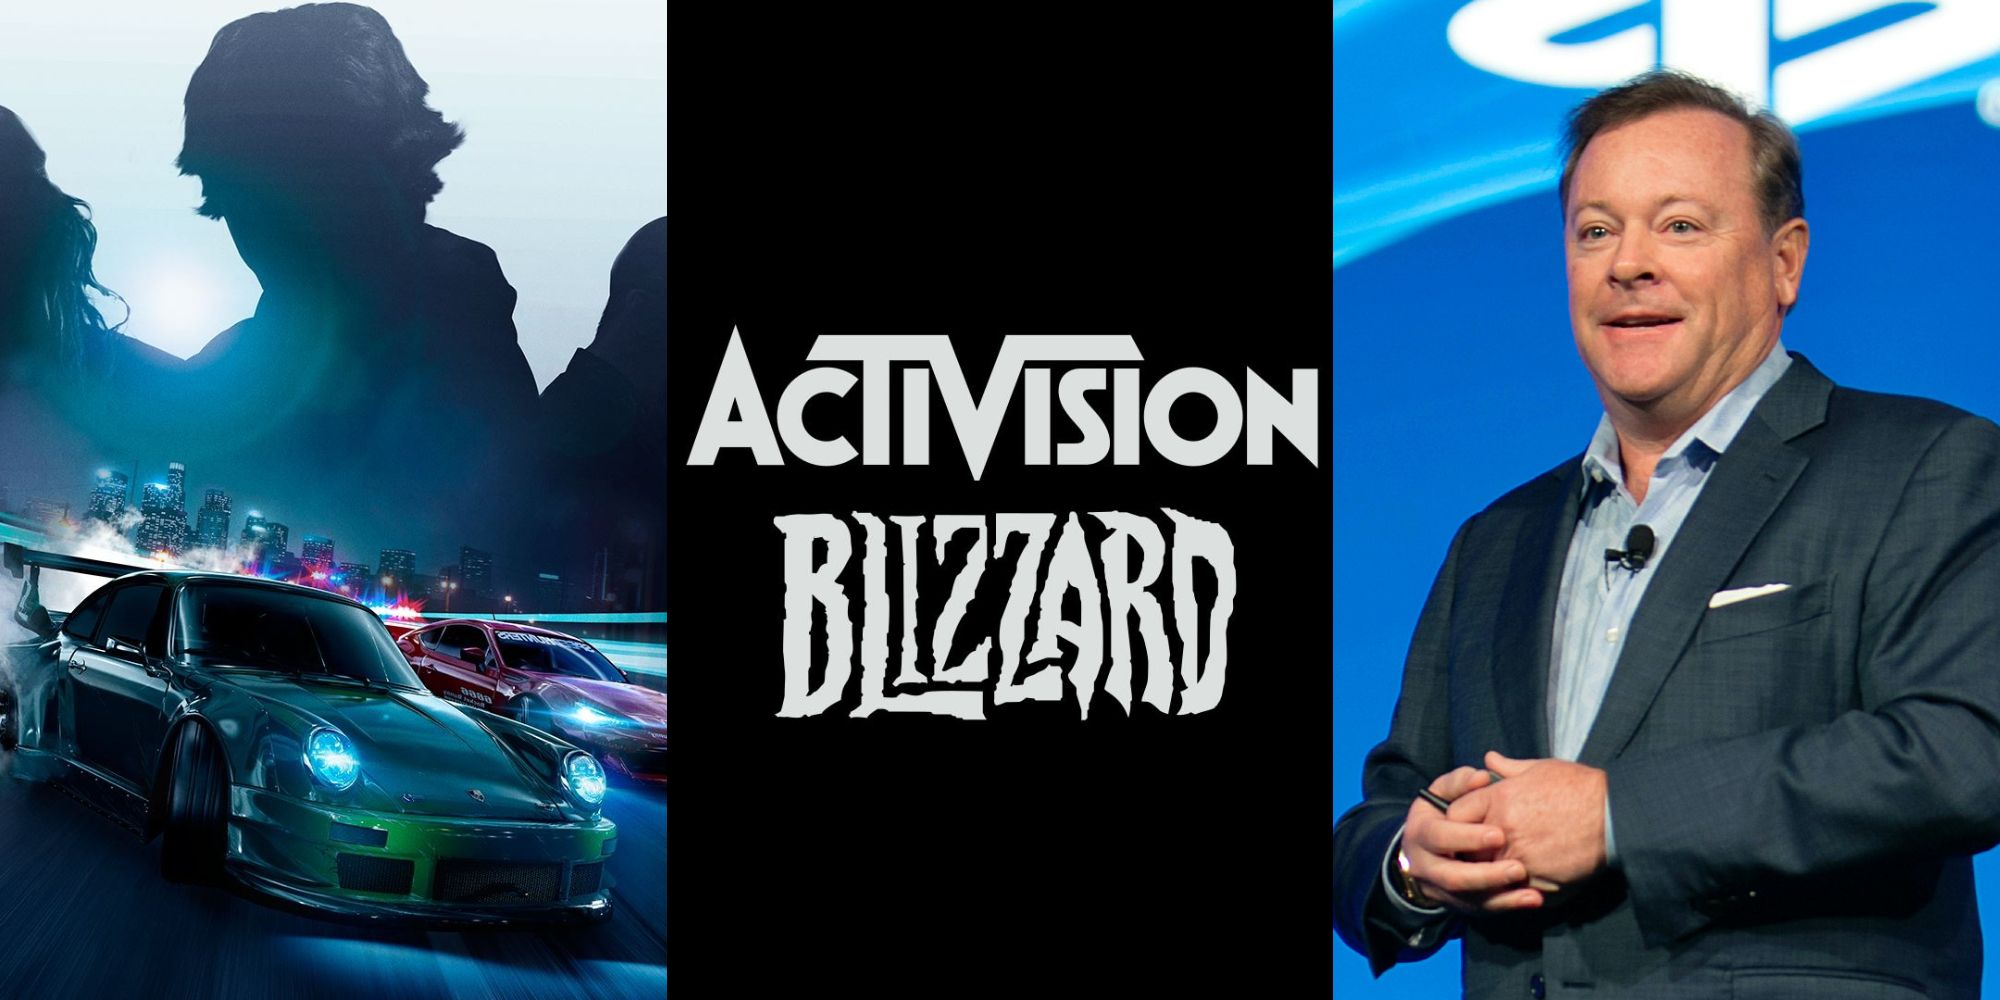 Some cars from Need for Speed, Activision Blizzard logo, and former Sony boss Jack Tretton